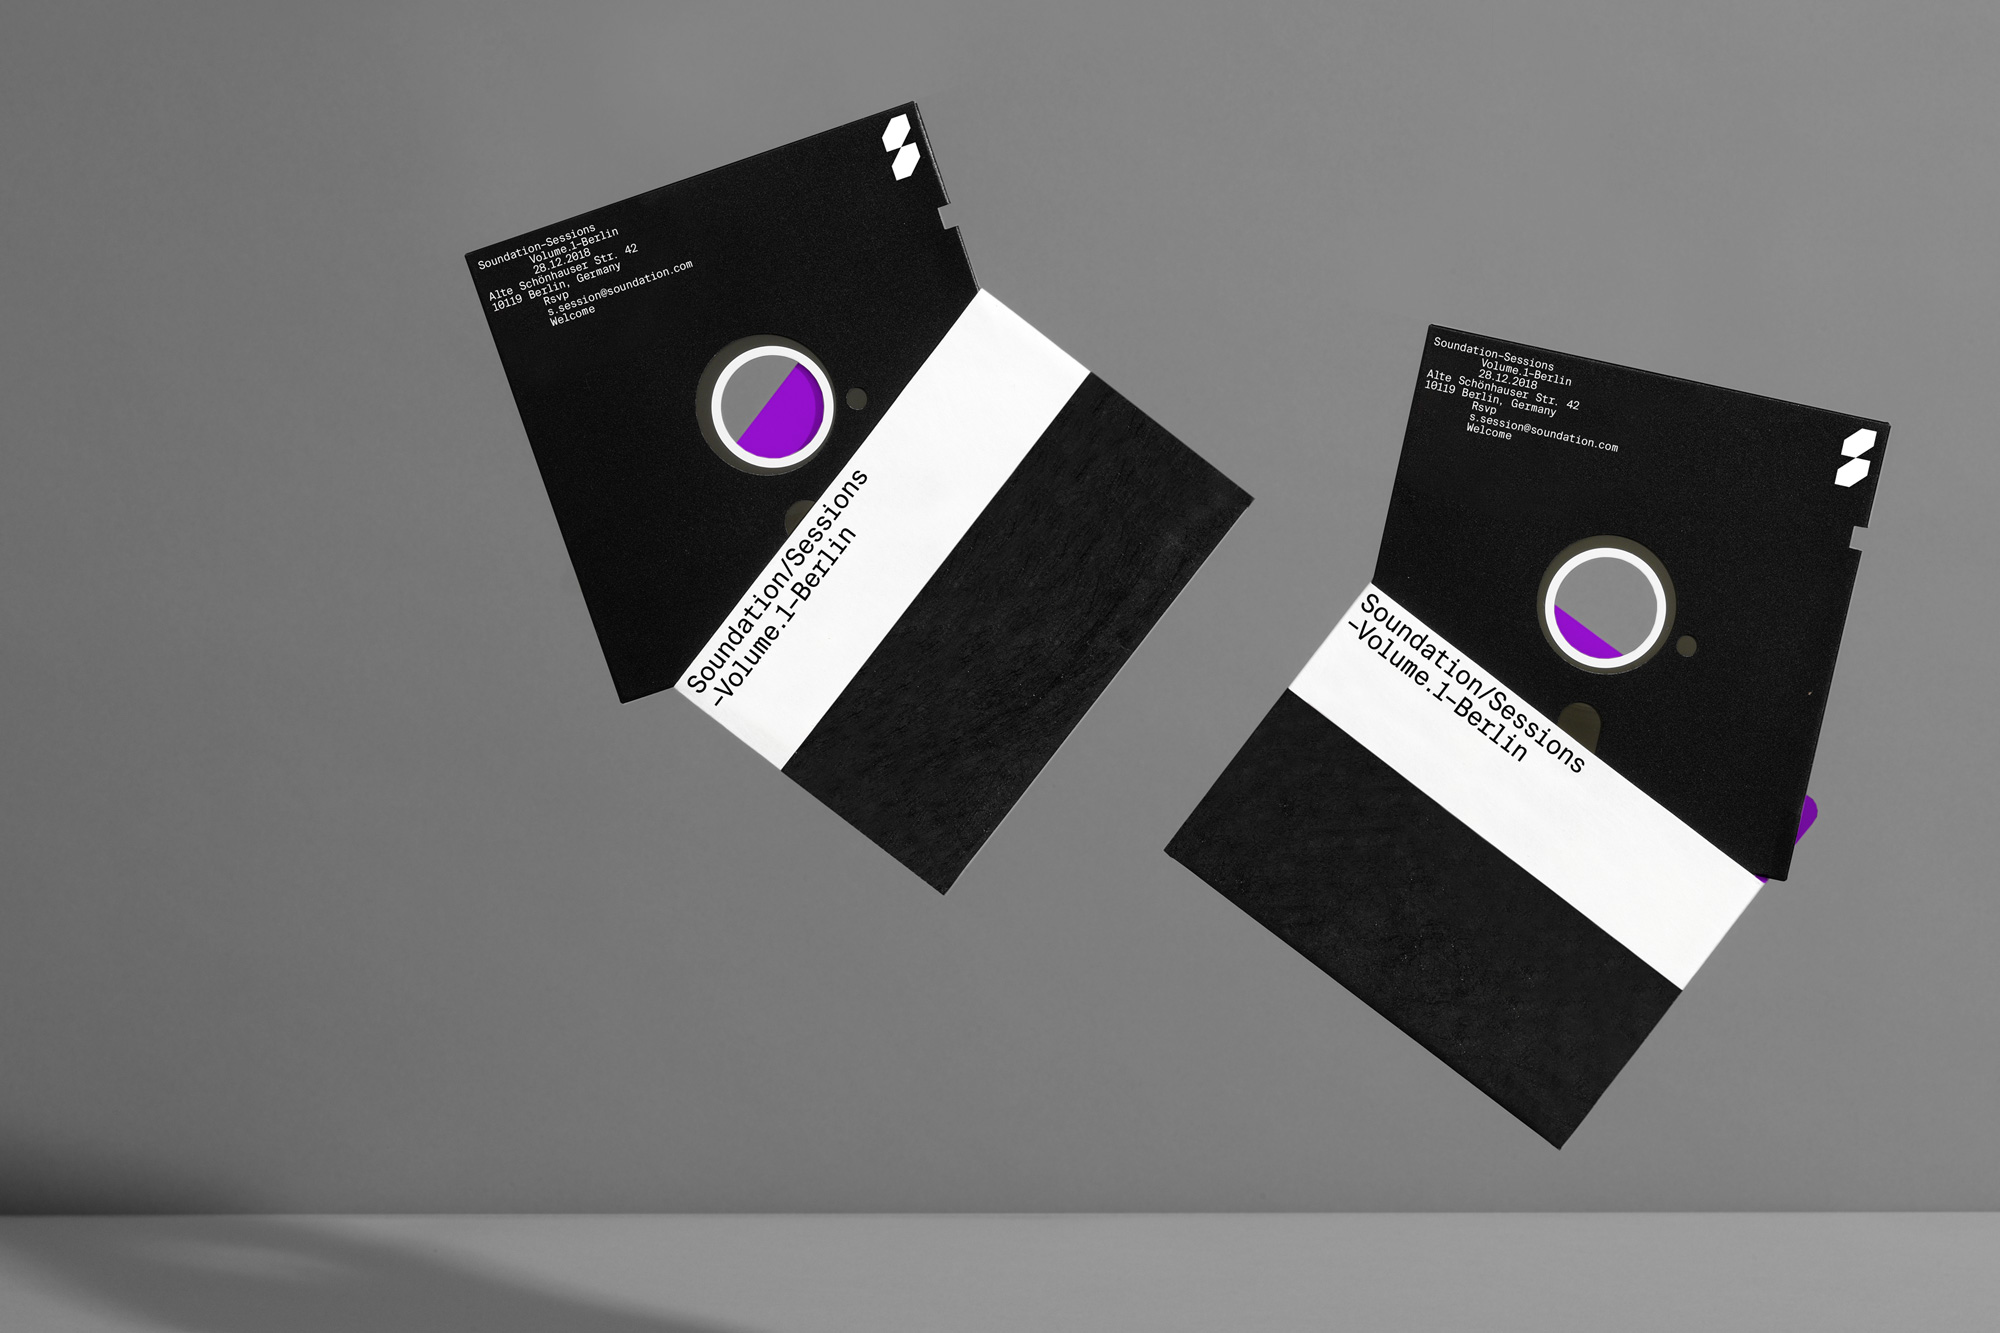 New Logo and Identity for Soundation by Kurppa Hosk